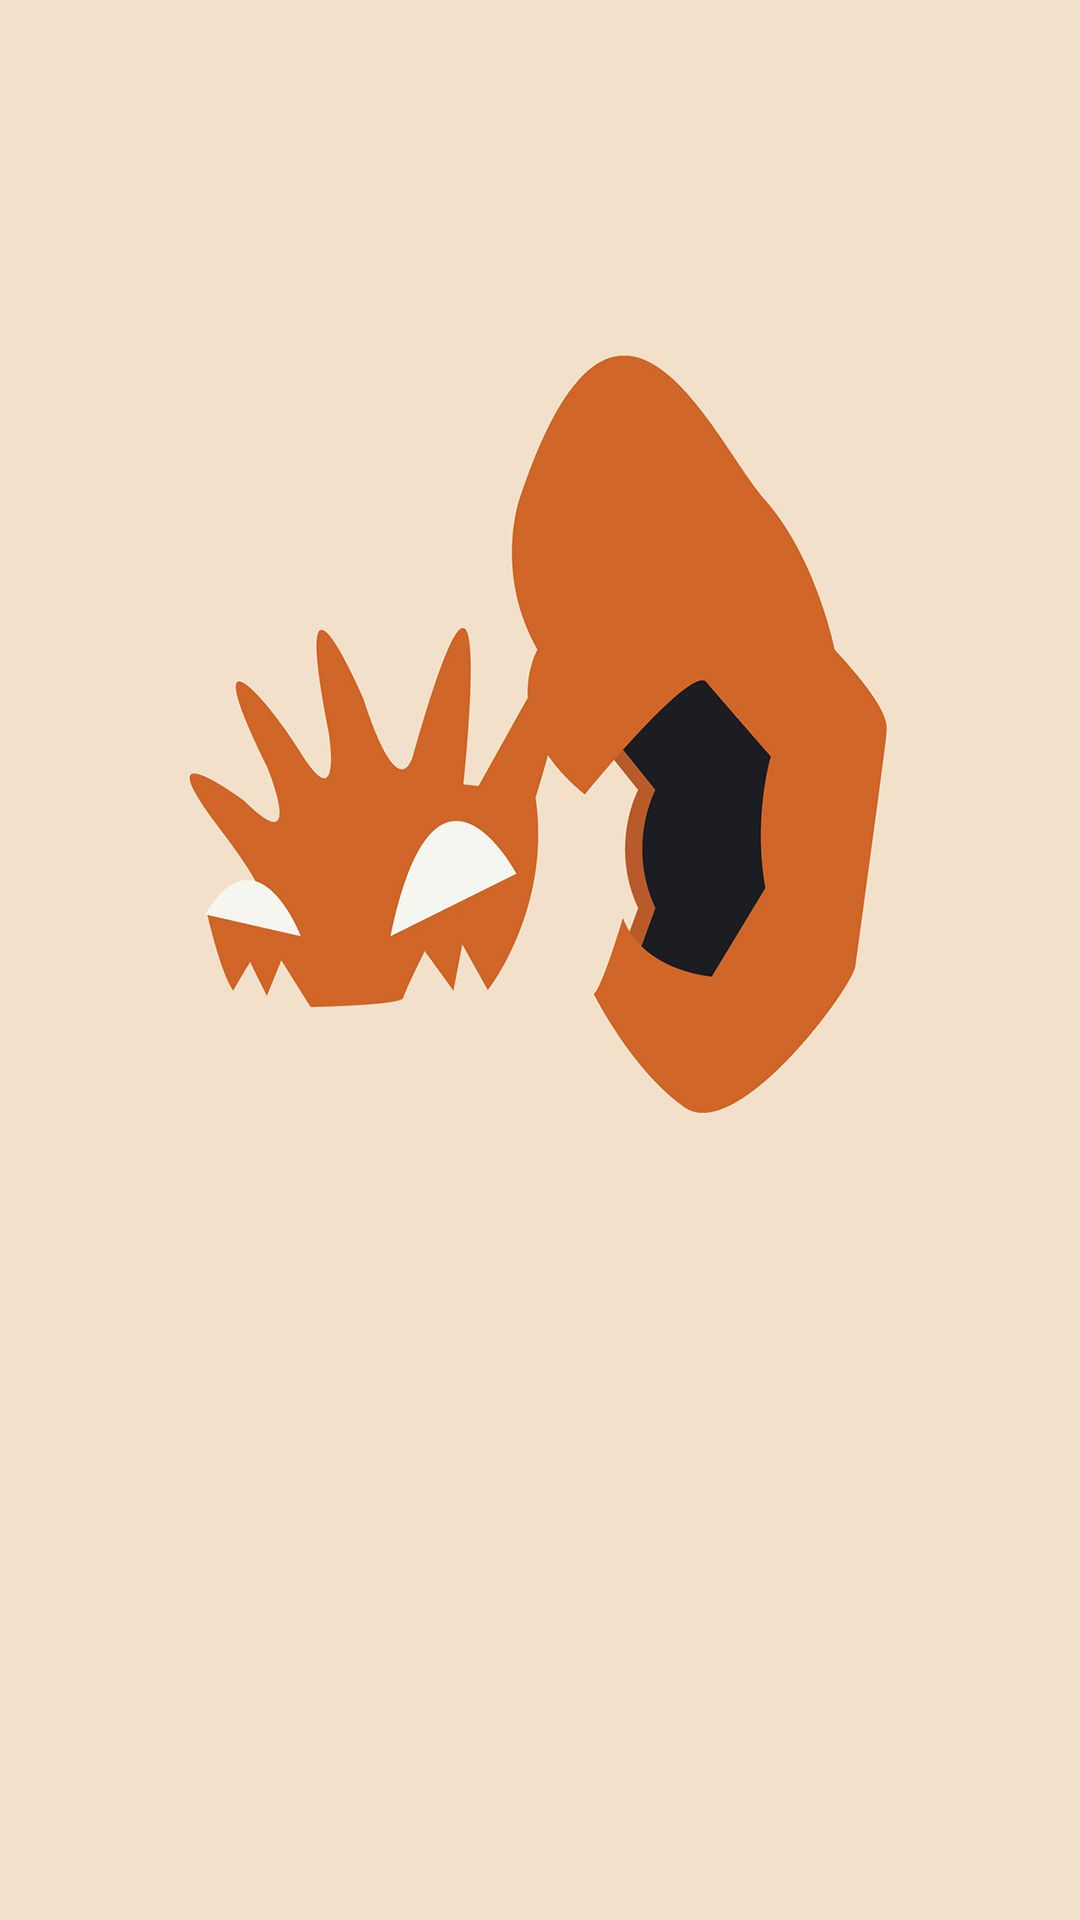 Minimal walls for pokemon fans. Collected and edited by me. Share …